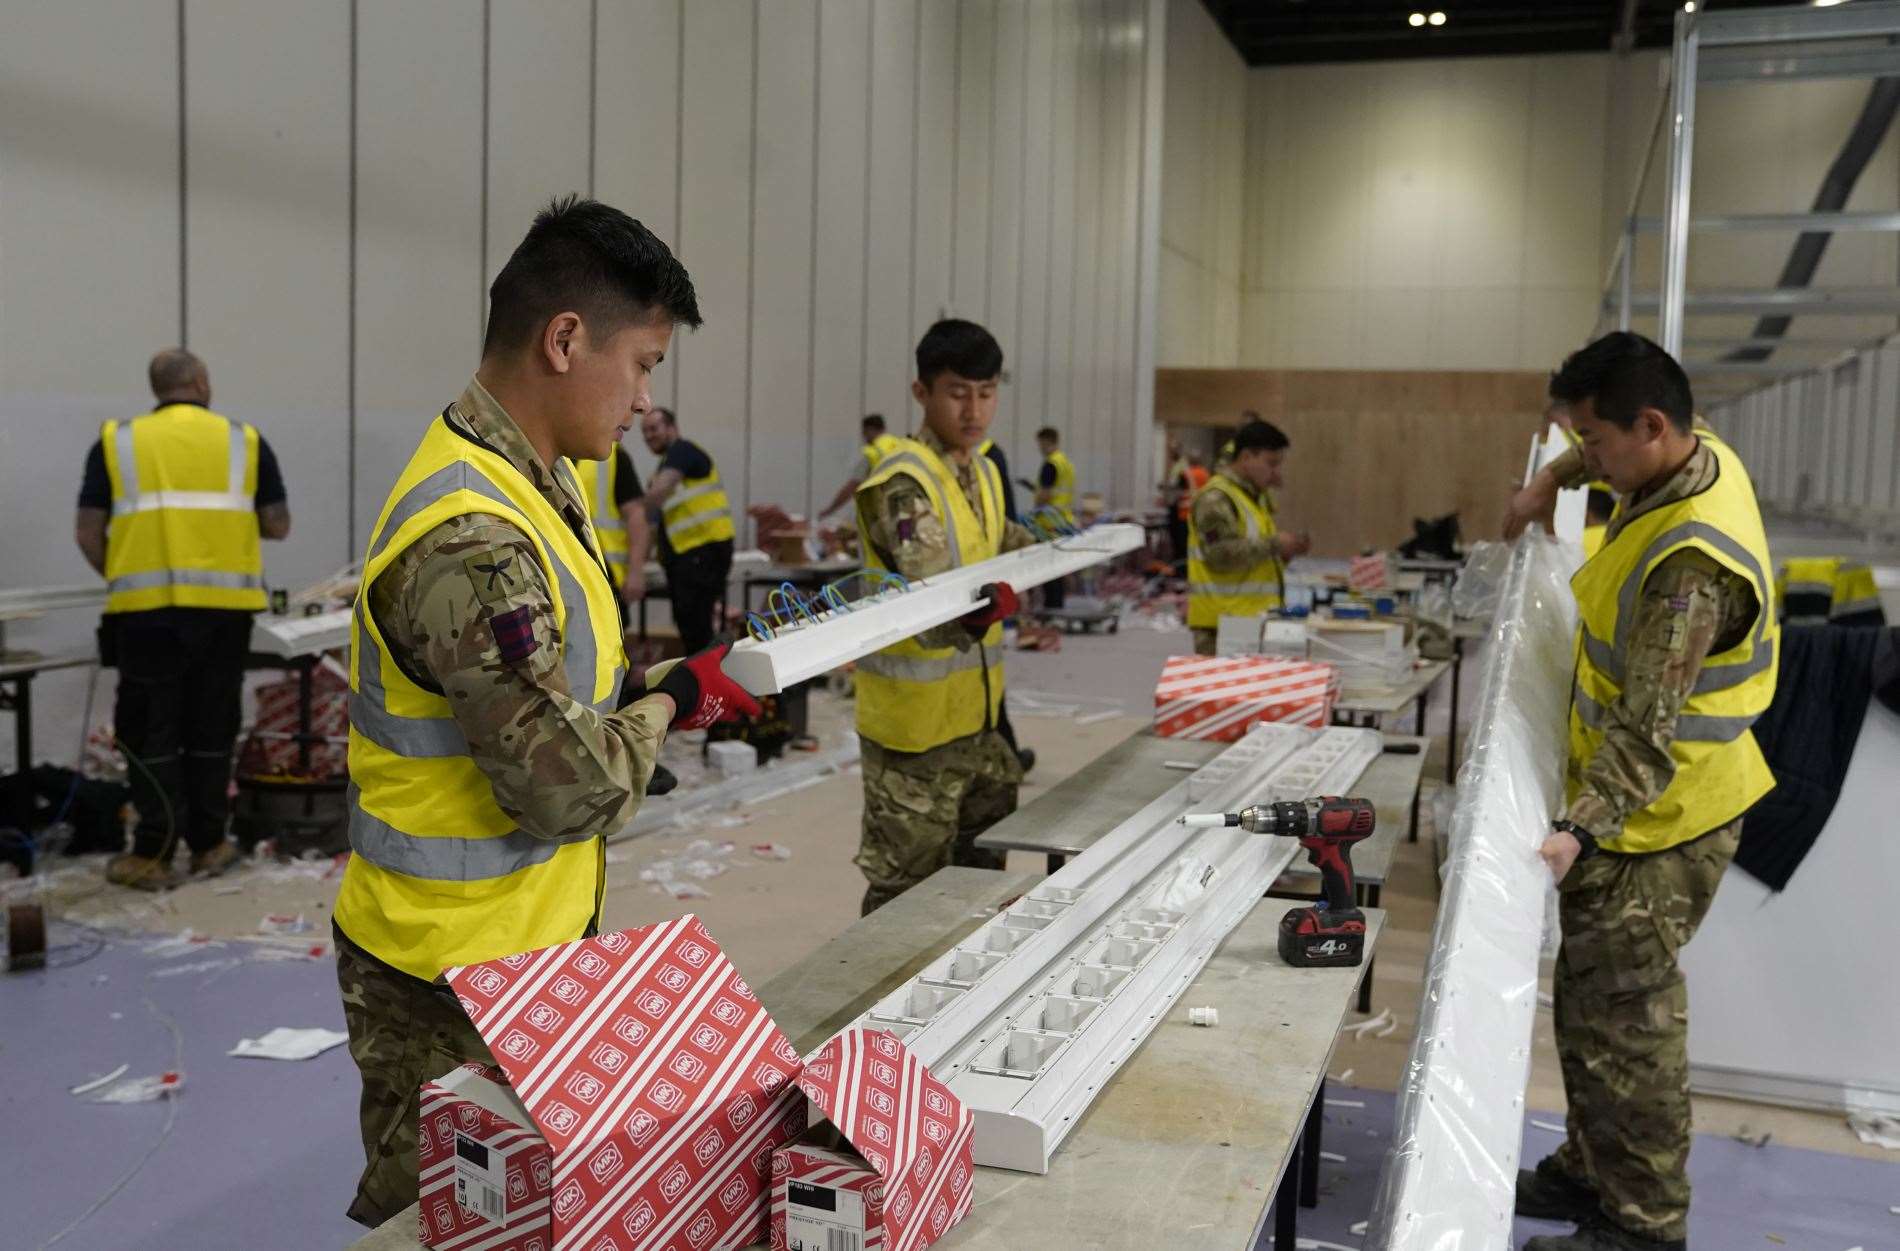 Gurkhas from the 36 Engineer Regiment based in Maidstone helped build the new Nightingale Hospital at the London ExCel centre